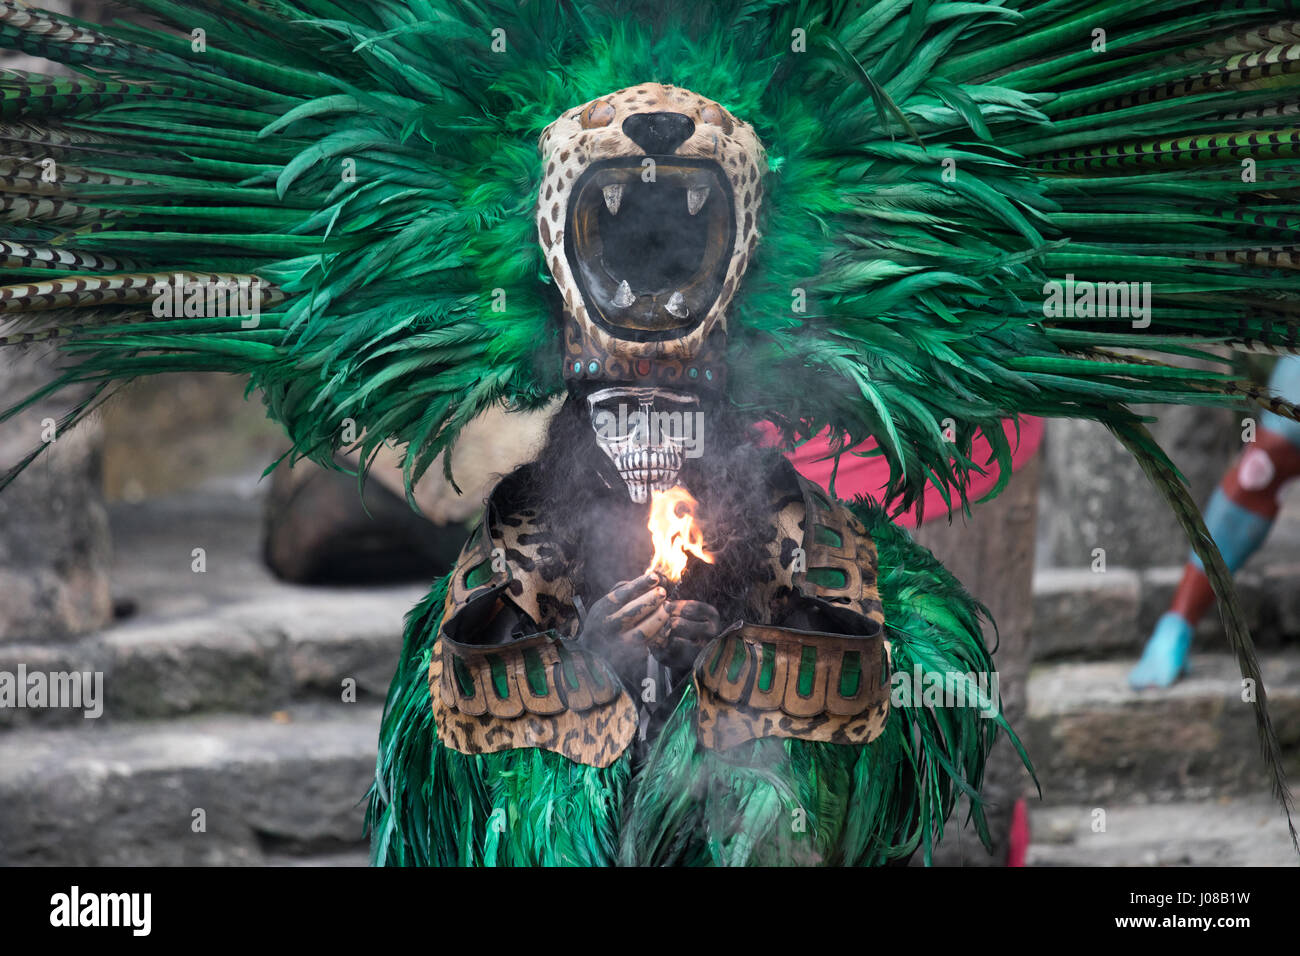 Cancun, Mexico - Mar 16, 2017: Handsome young man dressed in a traditional mayan jaguar costume. Stock Photo